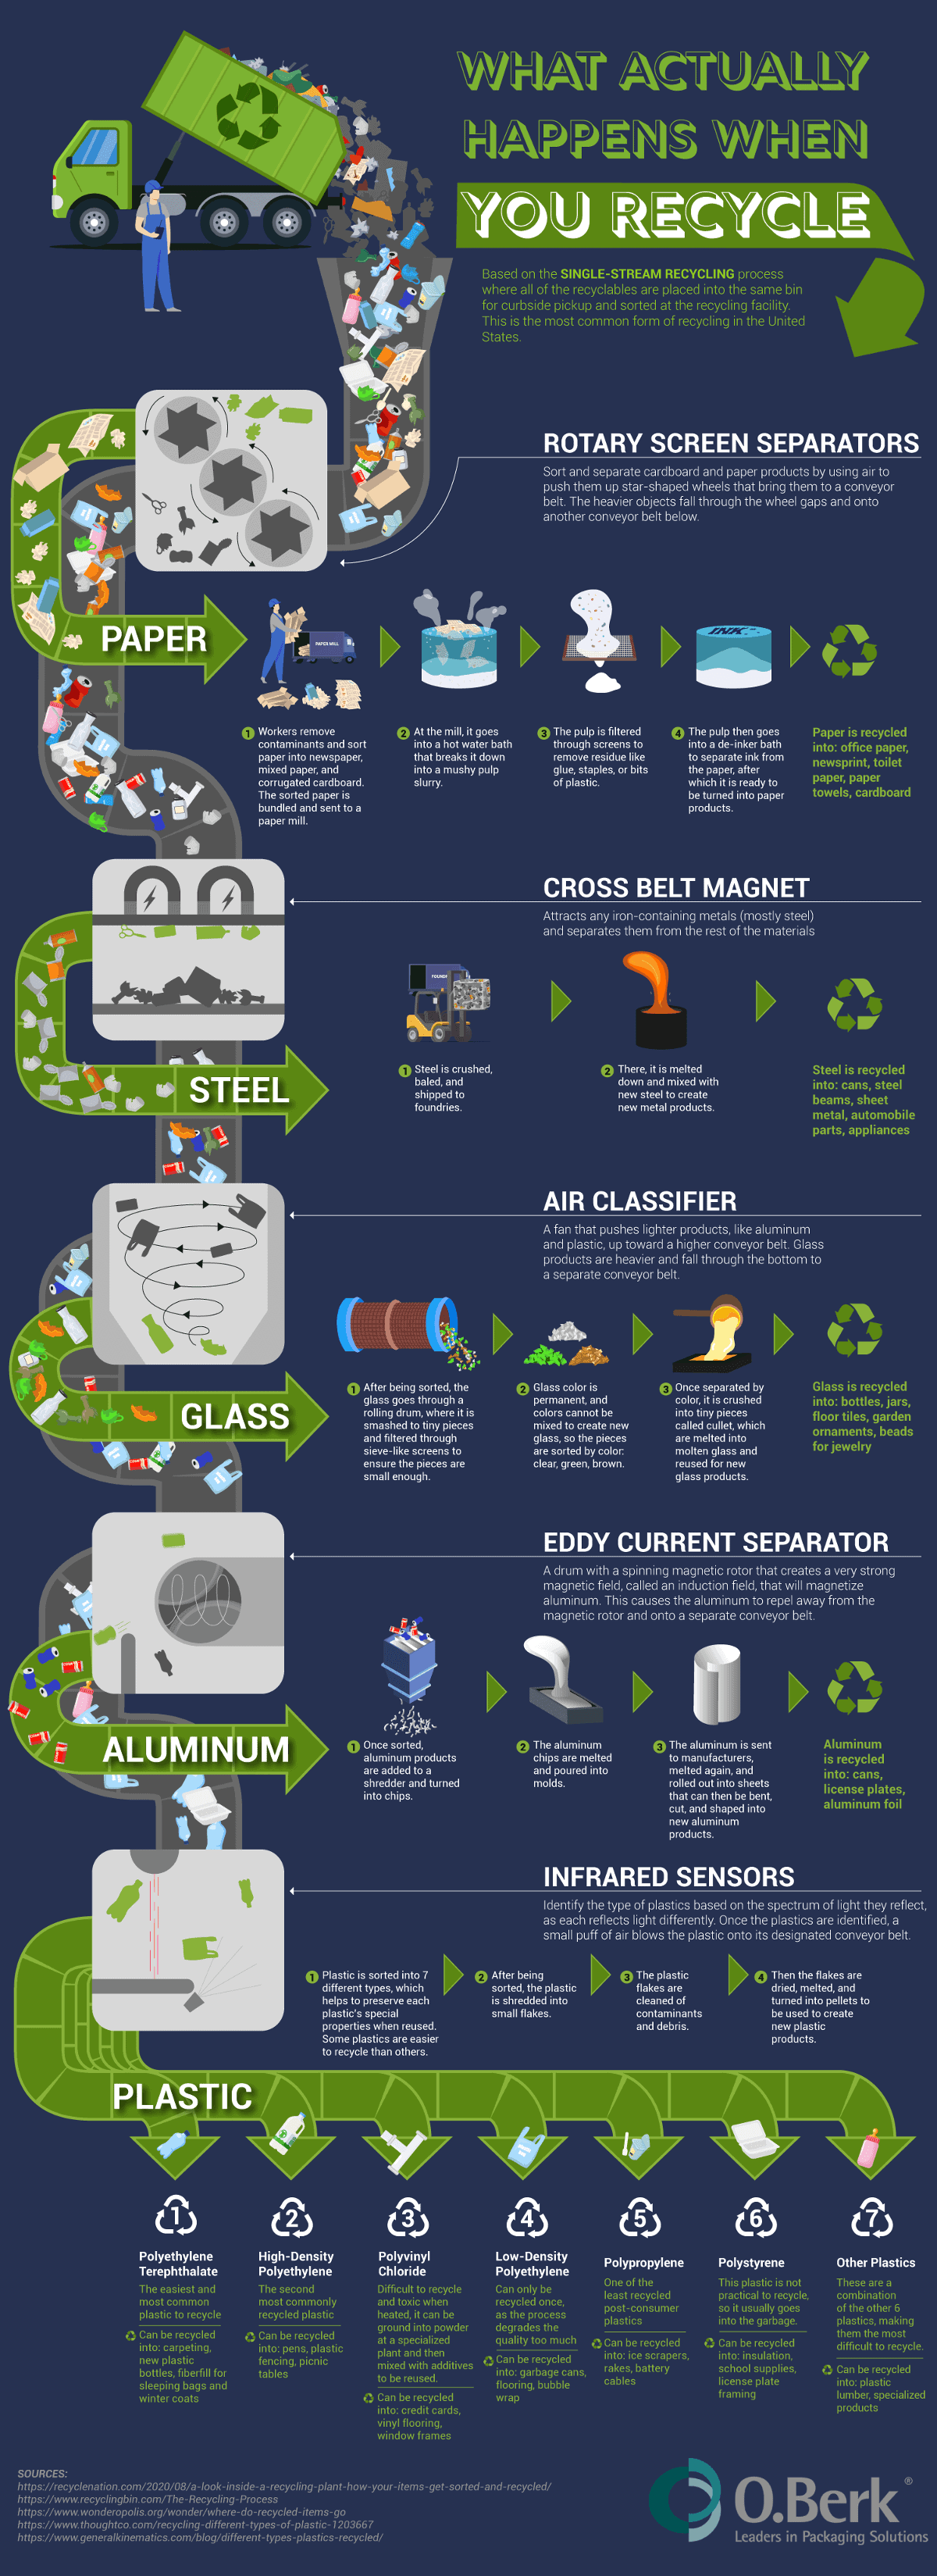 what-actually-happens-when-you-recycle-4_1200_c